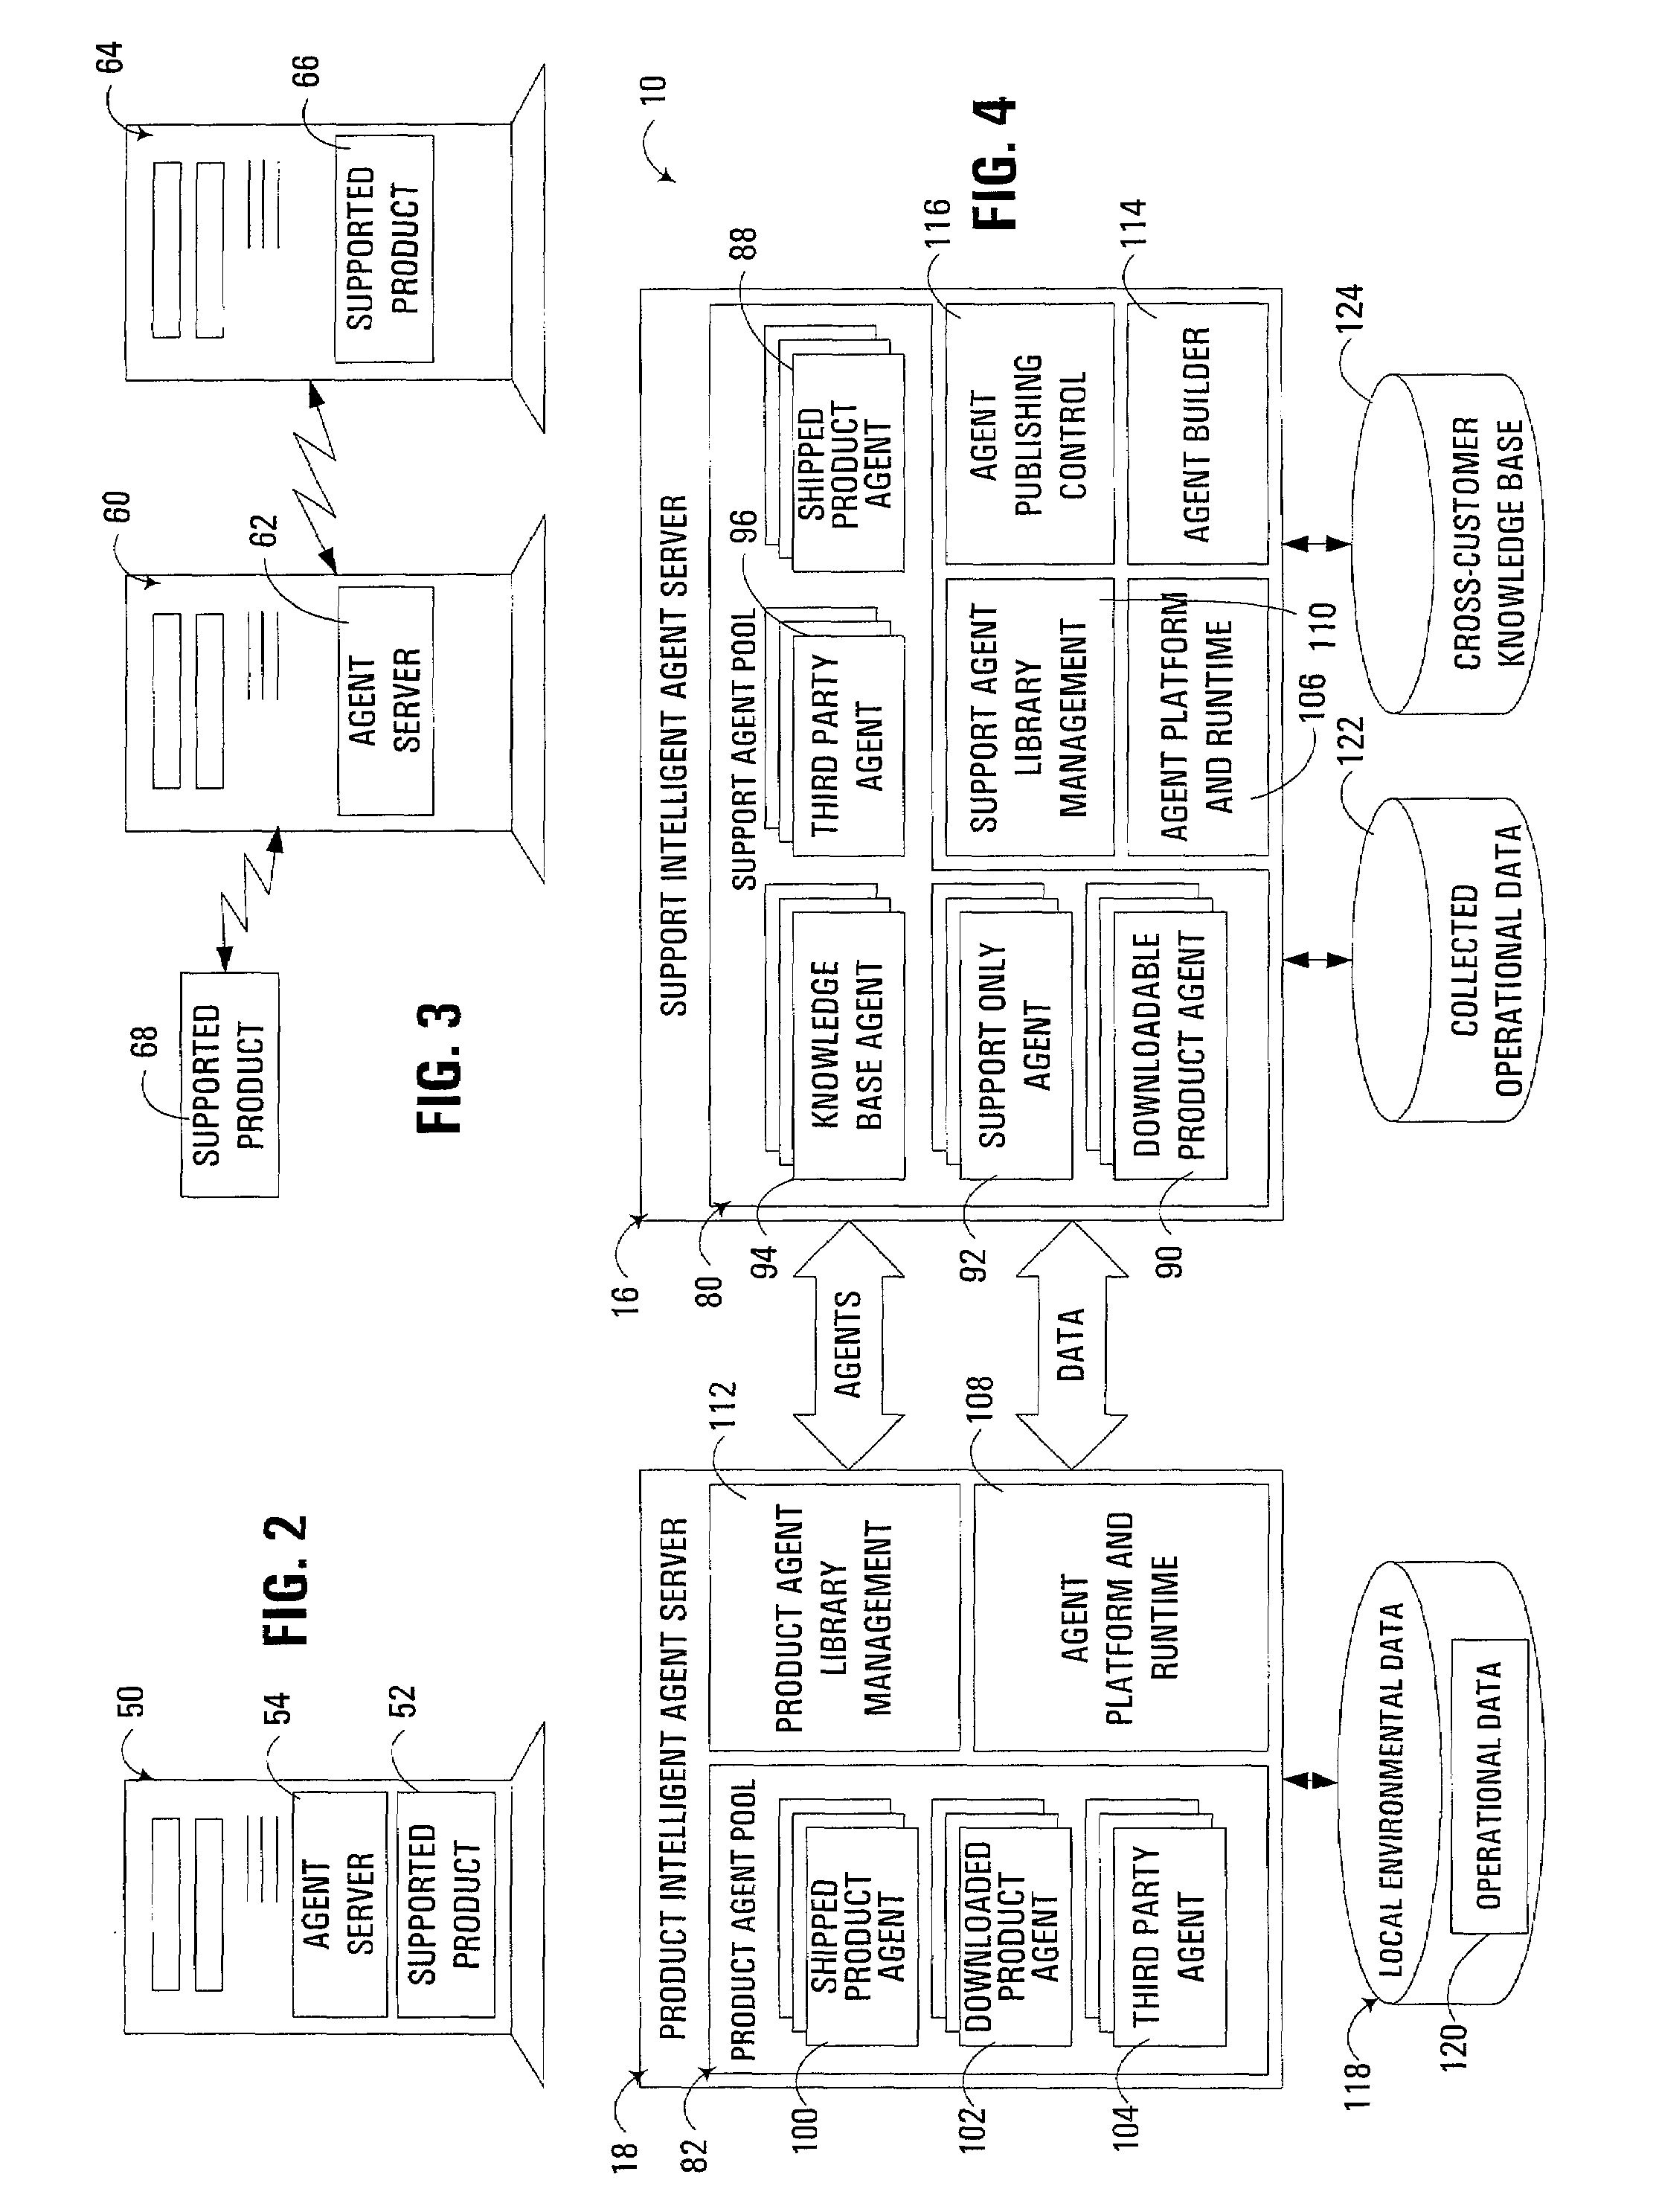 Product support of computer-related products using intelligent agents